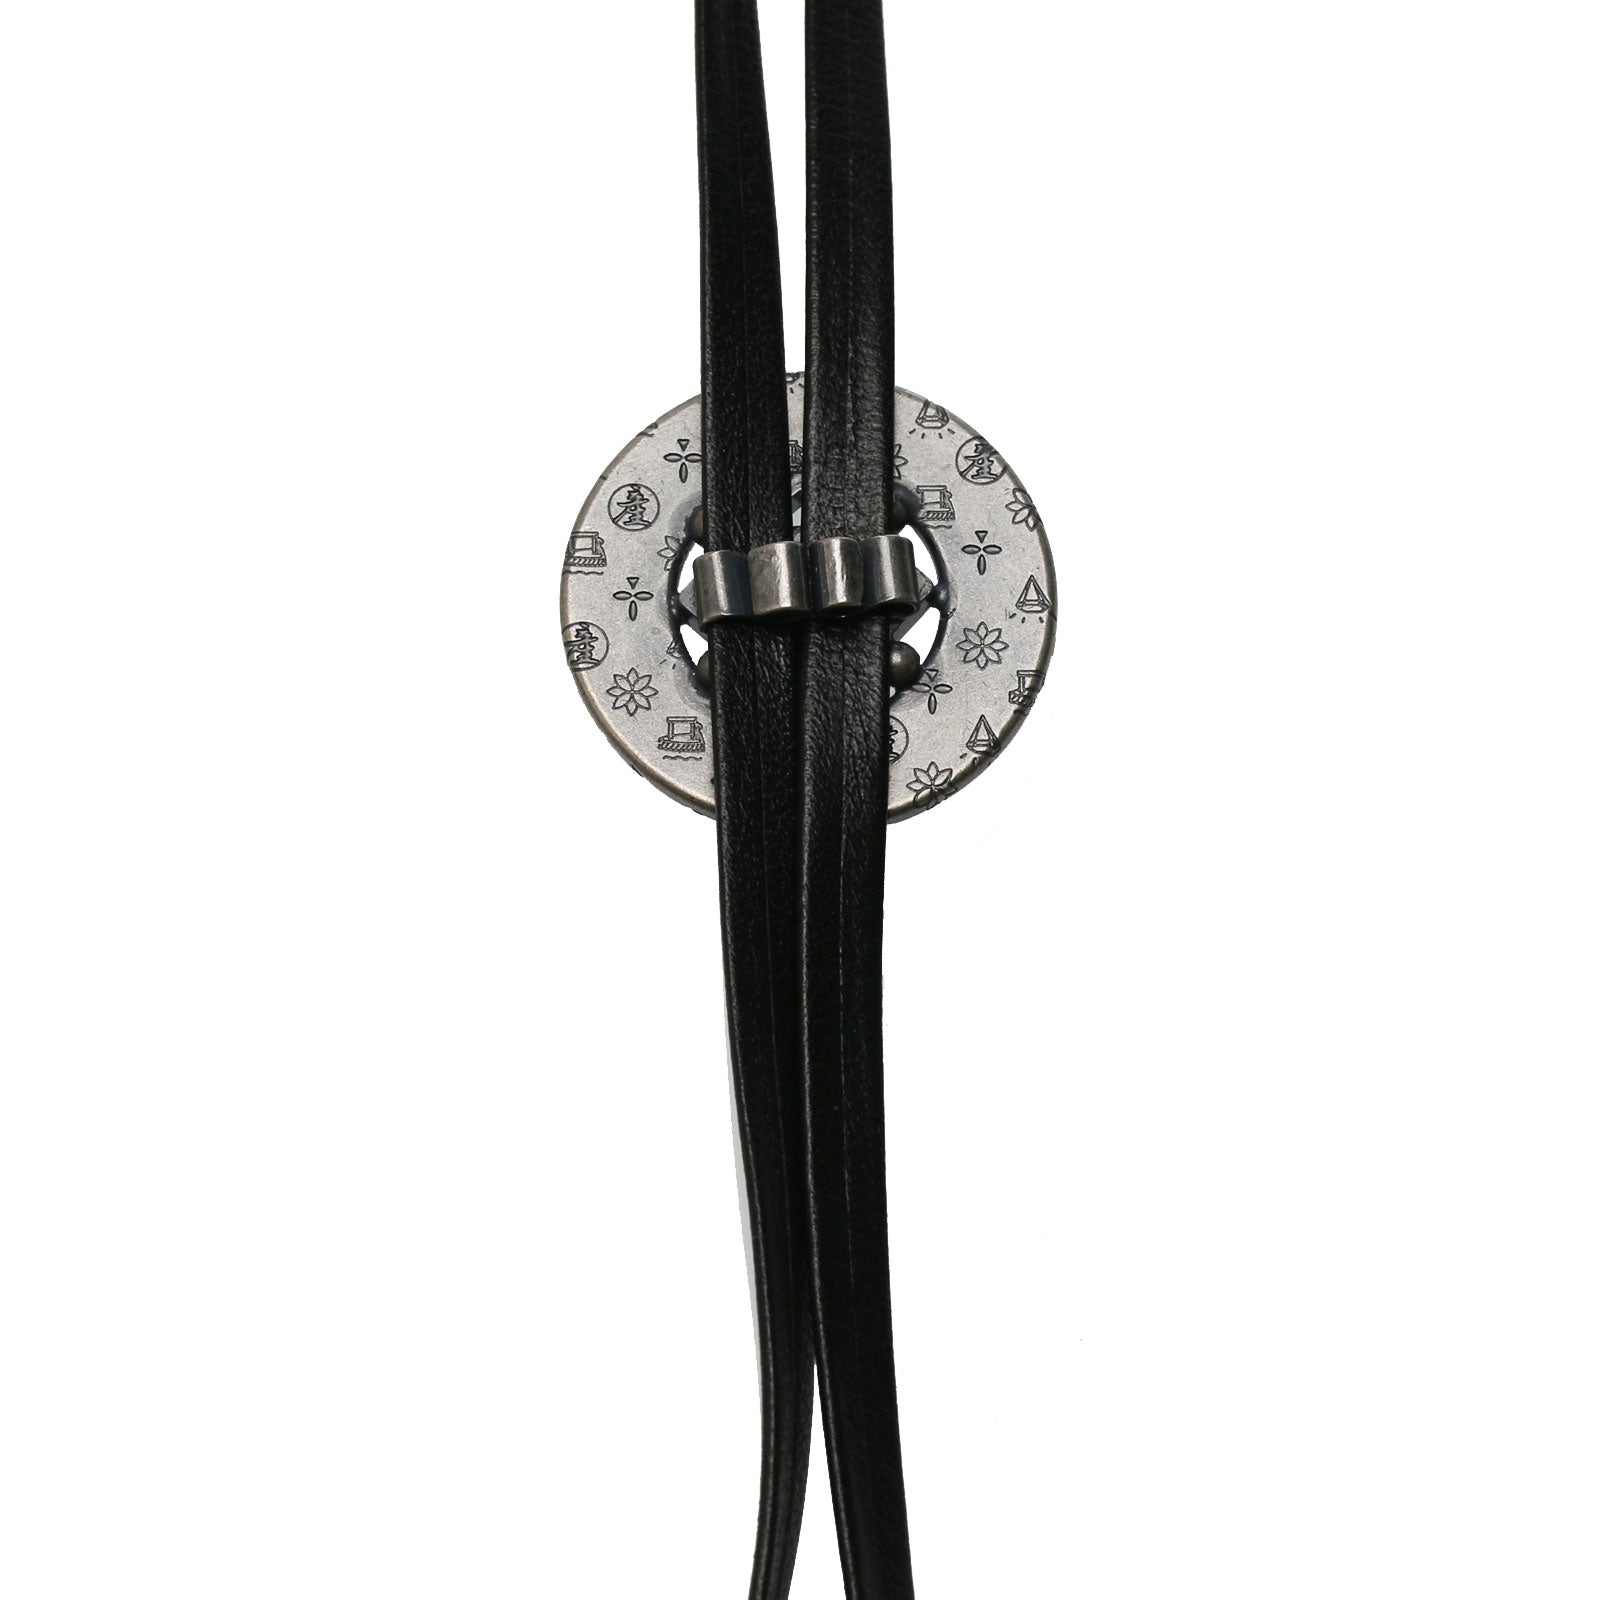 Leather Strap Bolo Tie Lilies Blue Resin TAMARUSAN